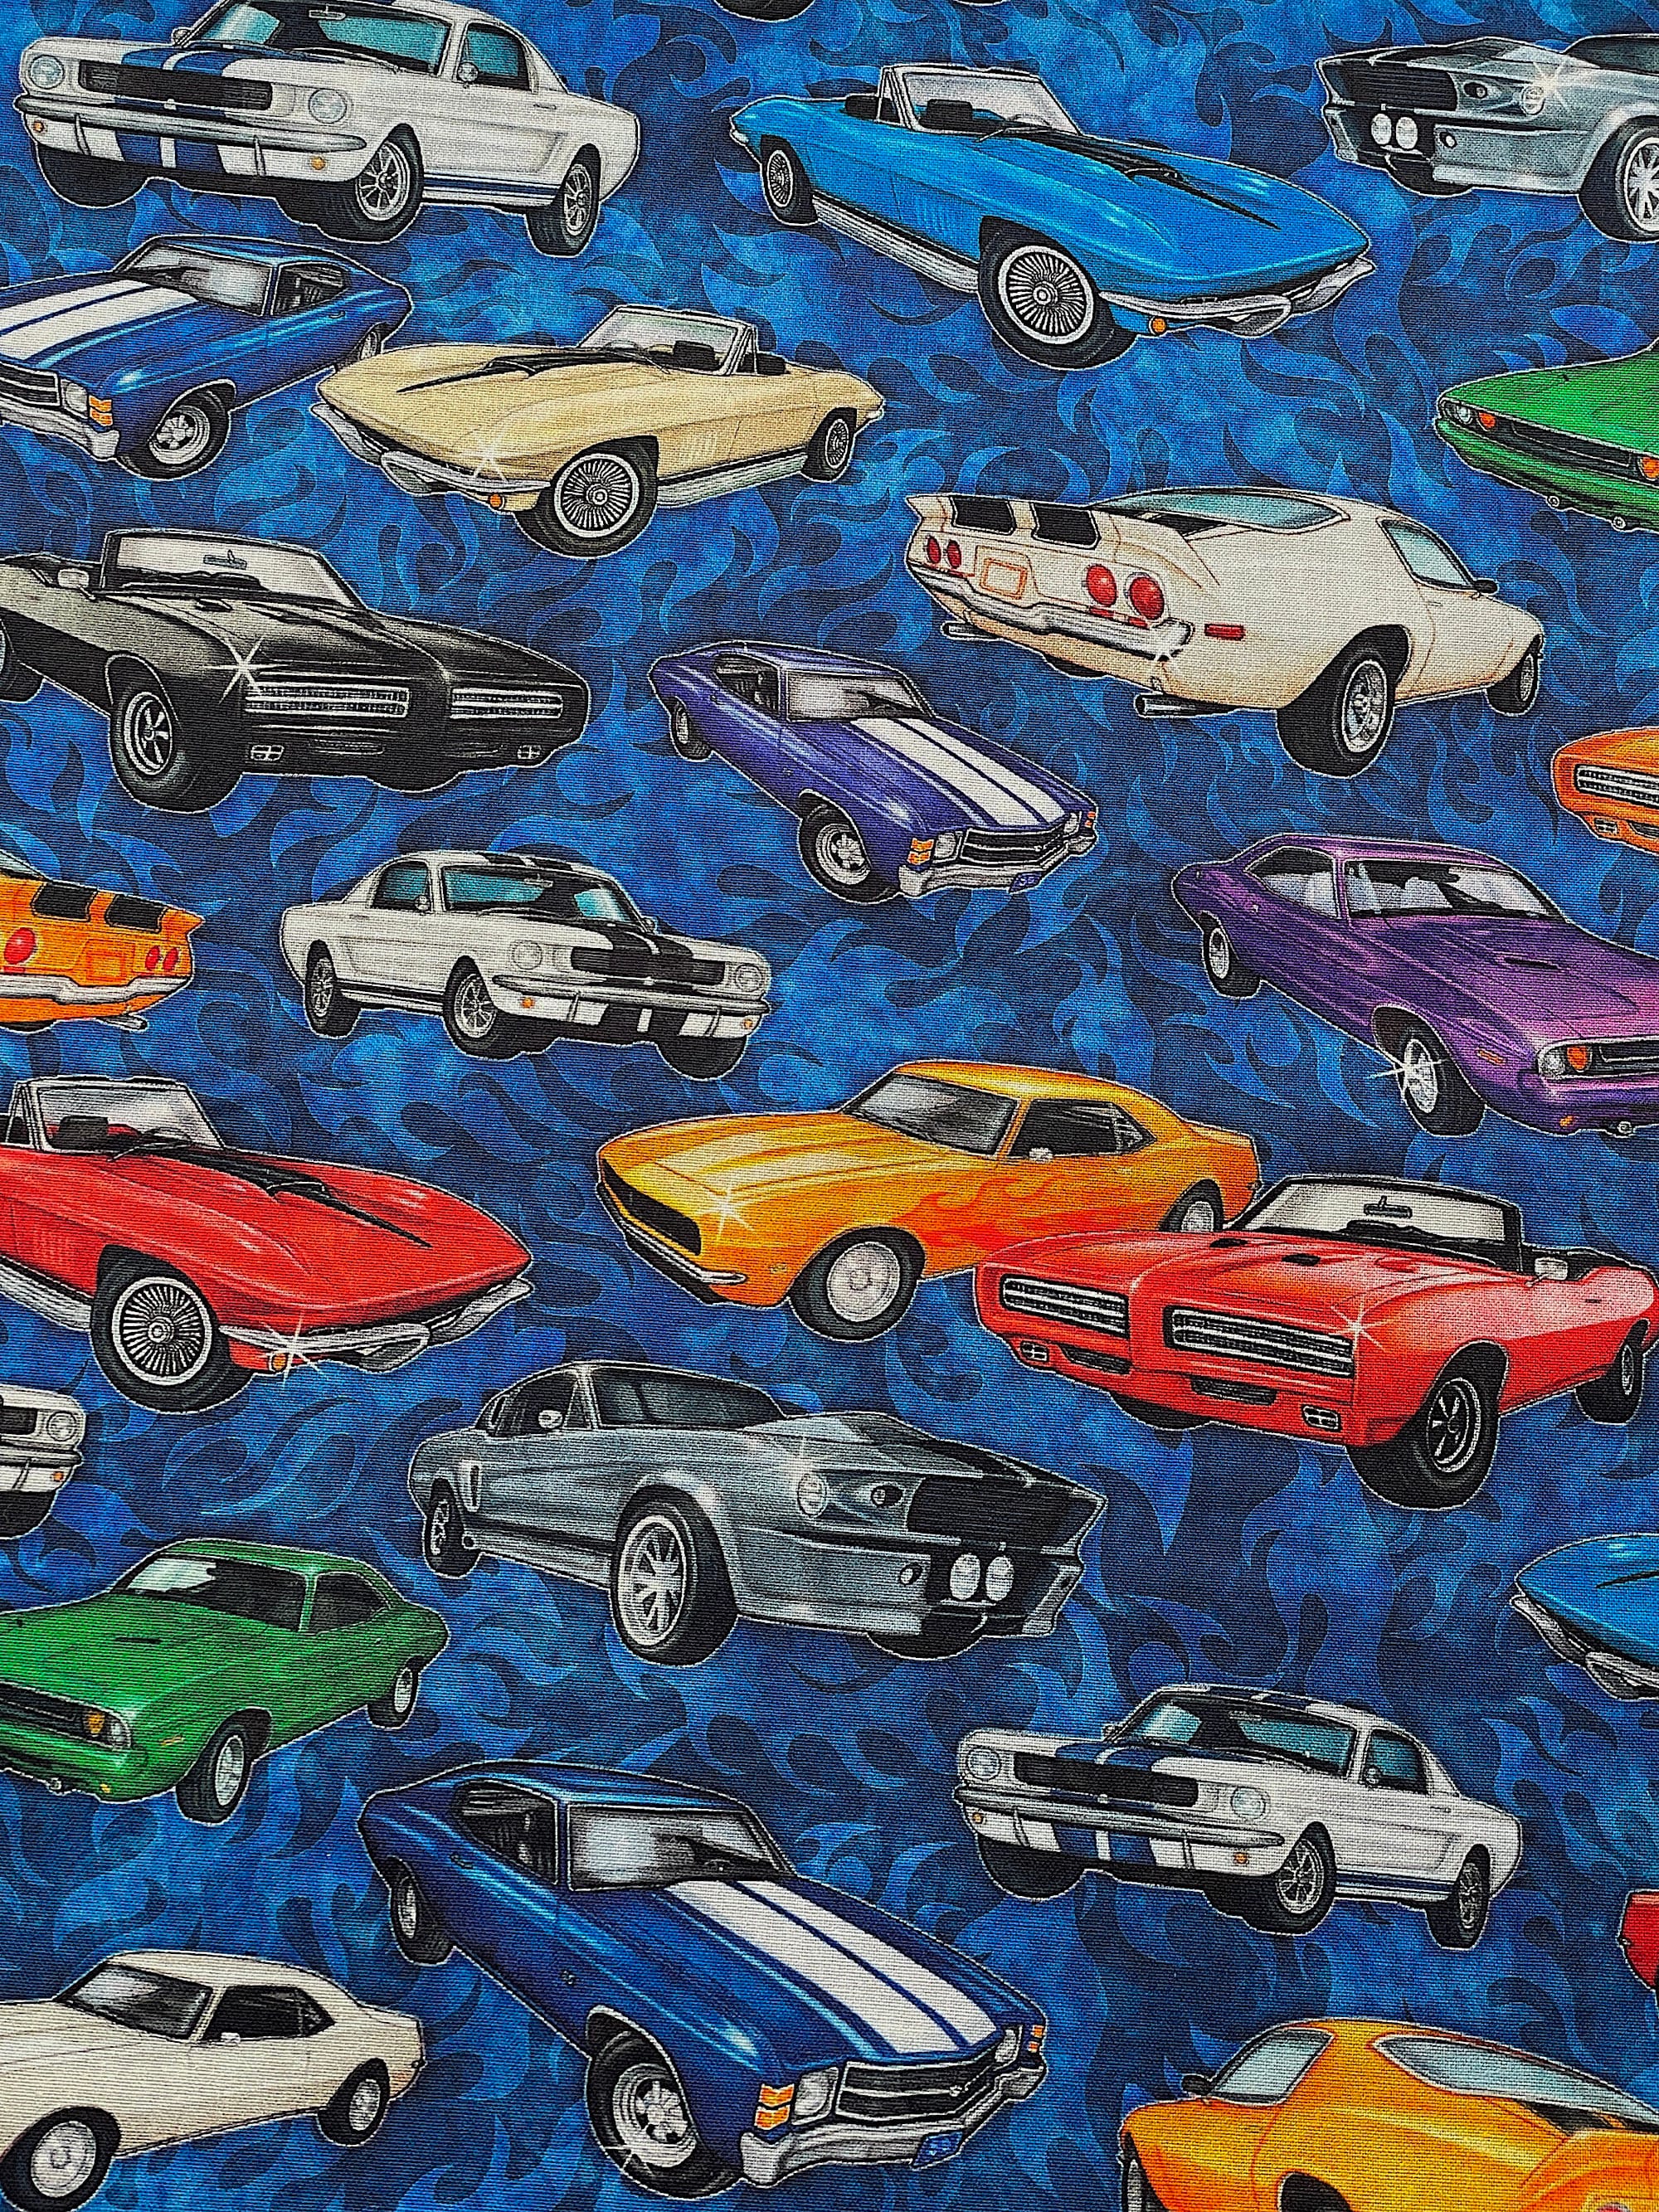 This blue cotton fabric is covered with old cars. The cars are white, green, blue, purple, blue, orange and black.